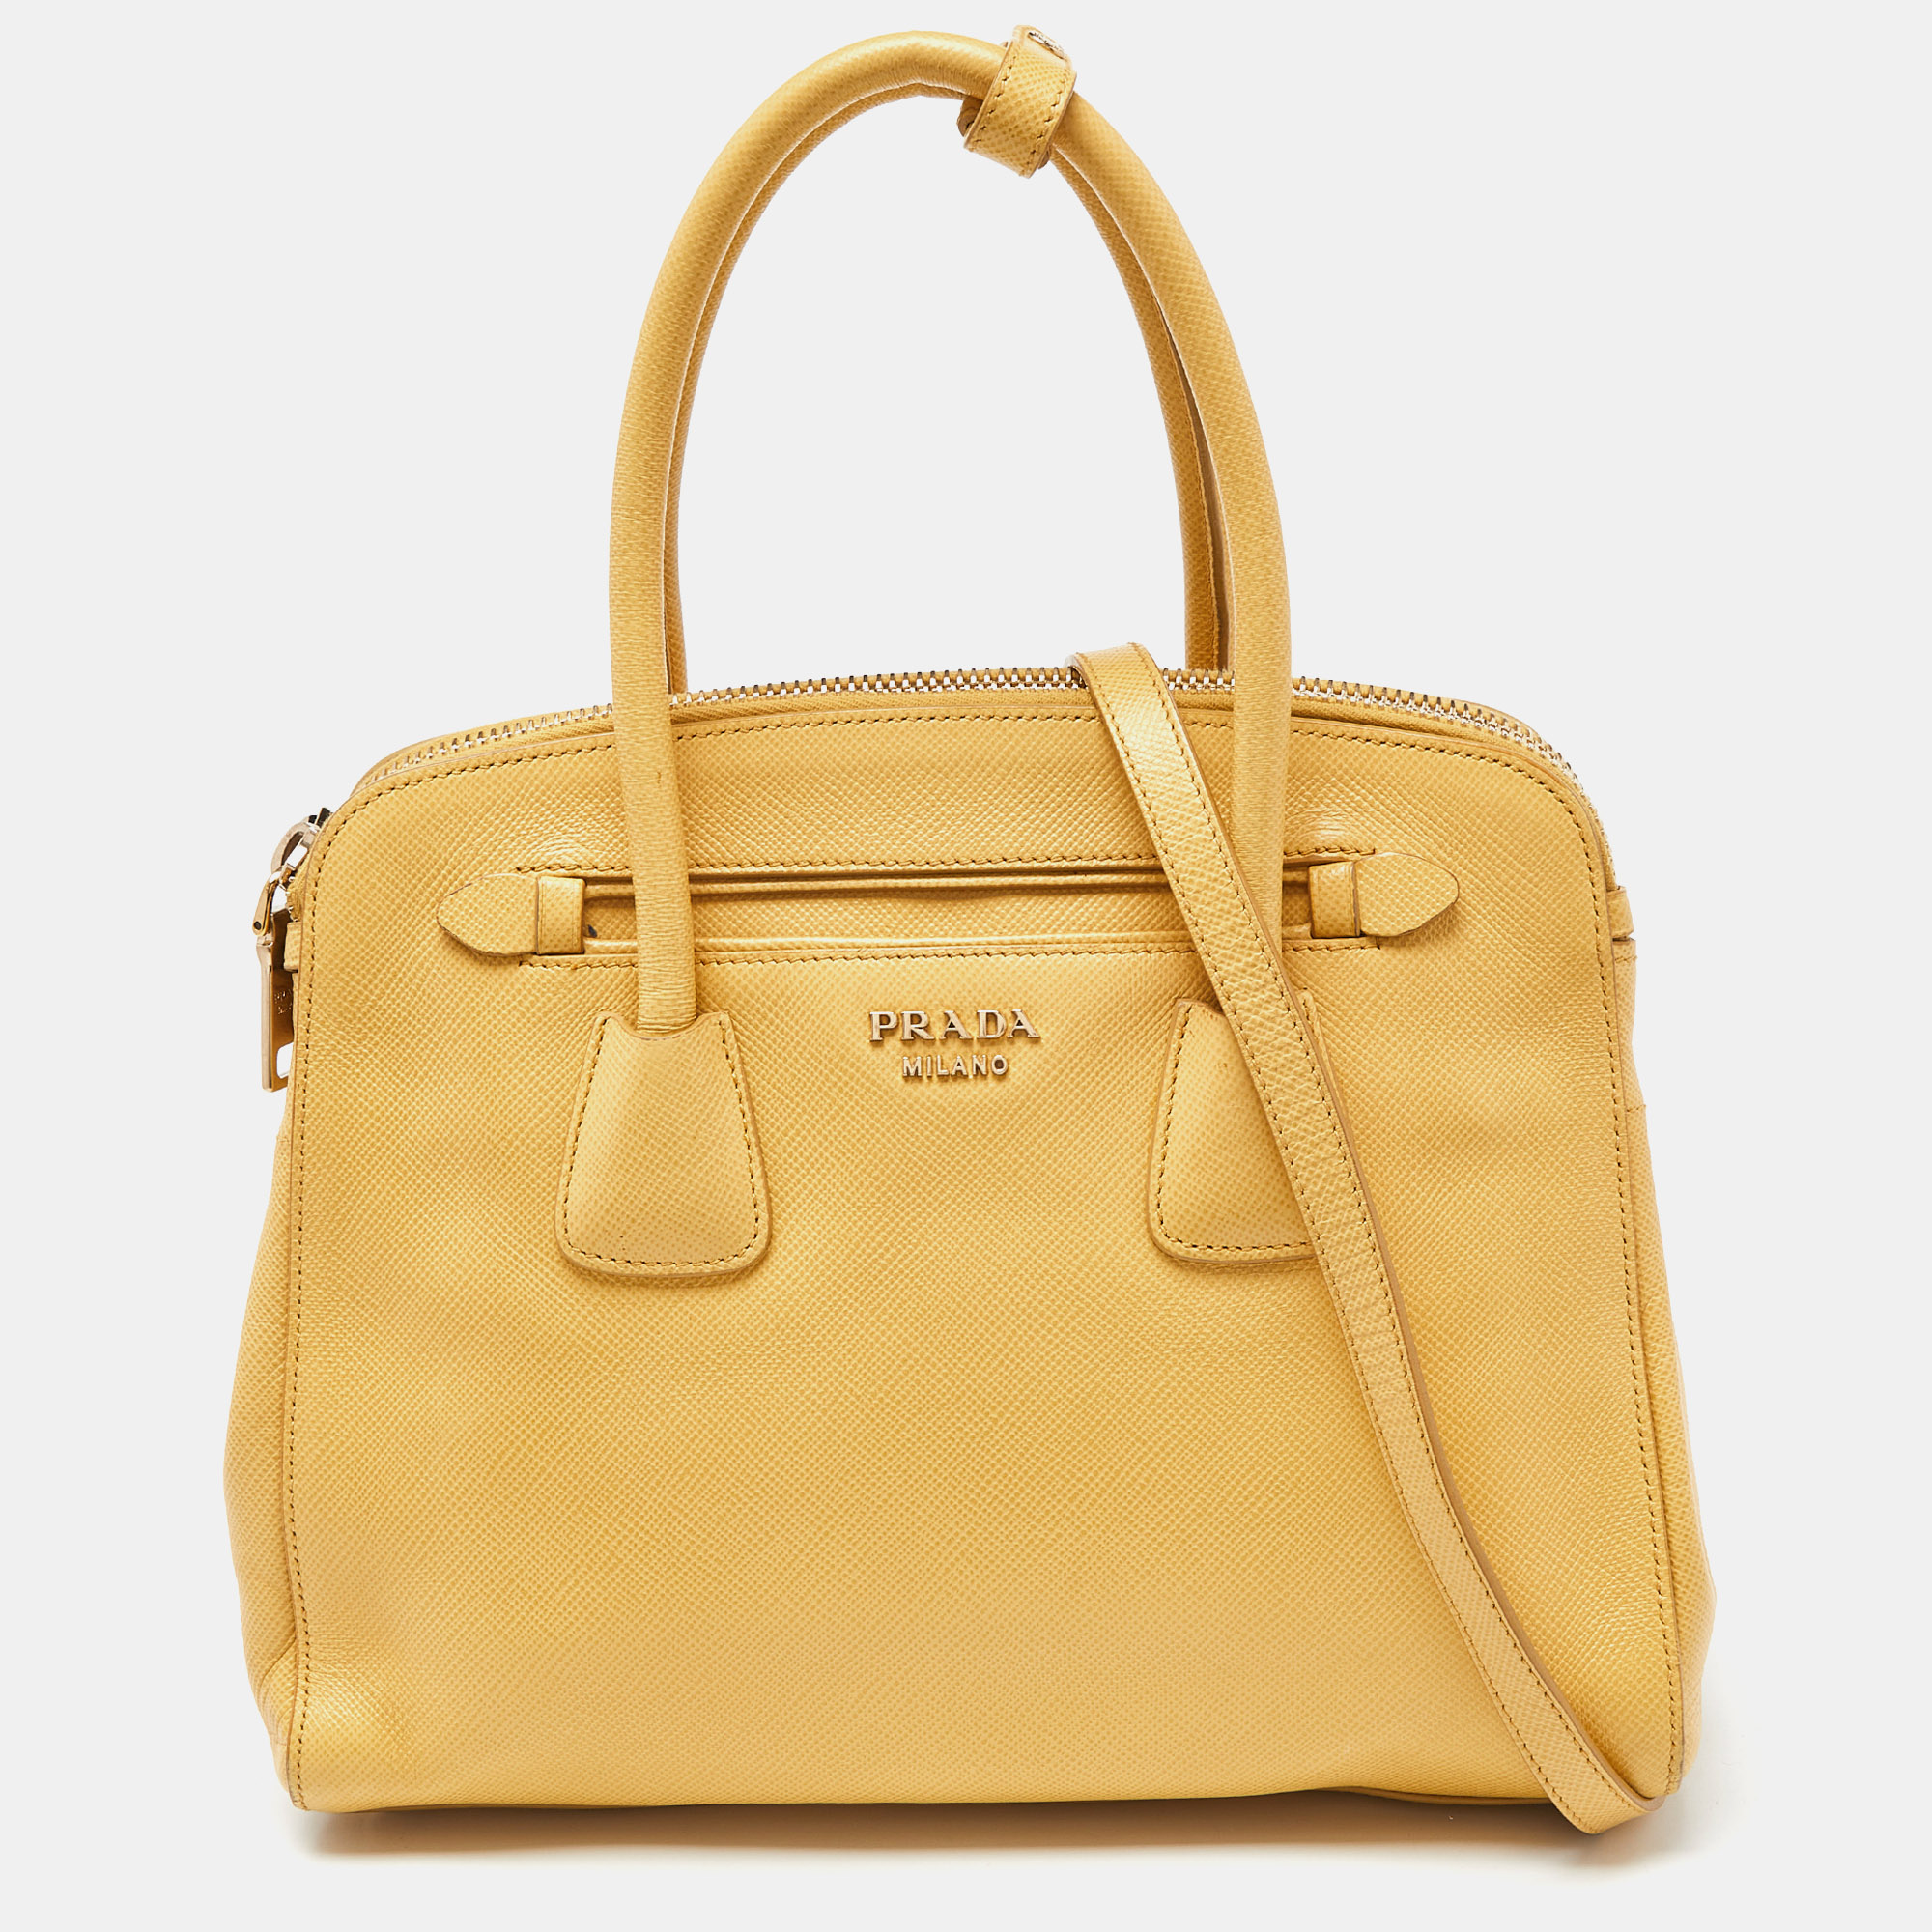 Pre-owned Prada Yellow Saffiano Lux Leather Satchel